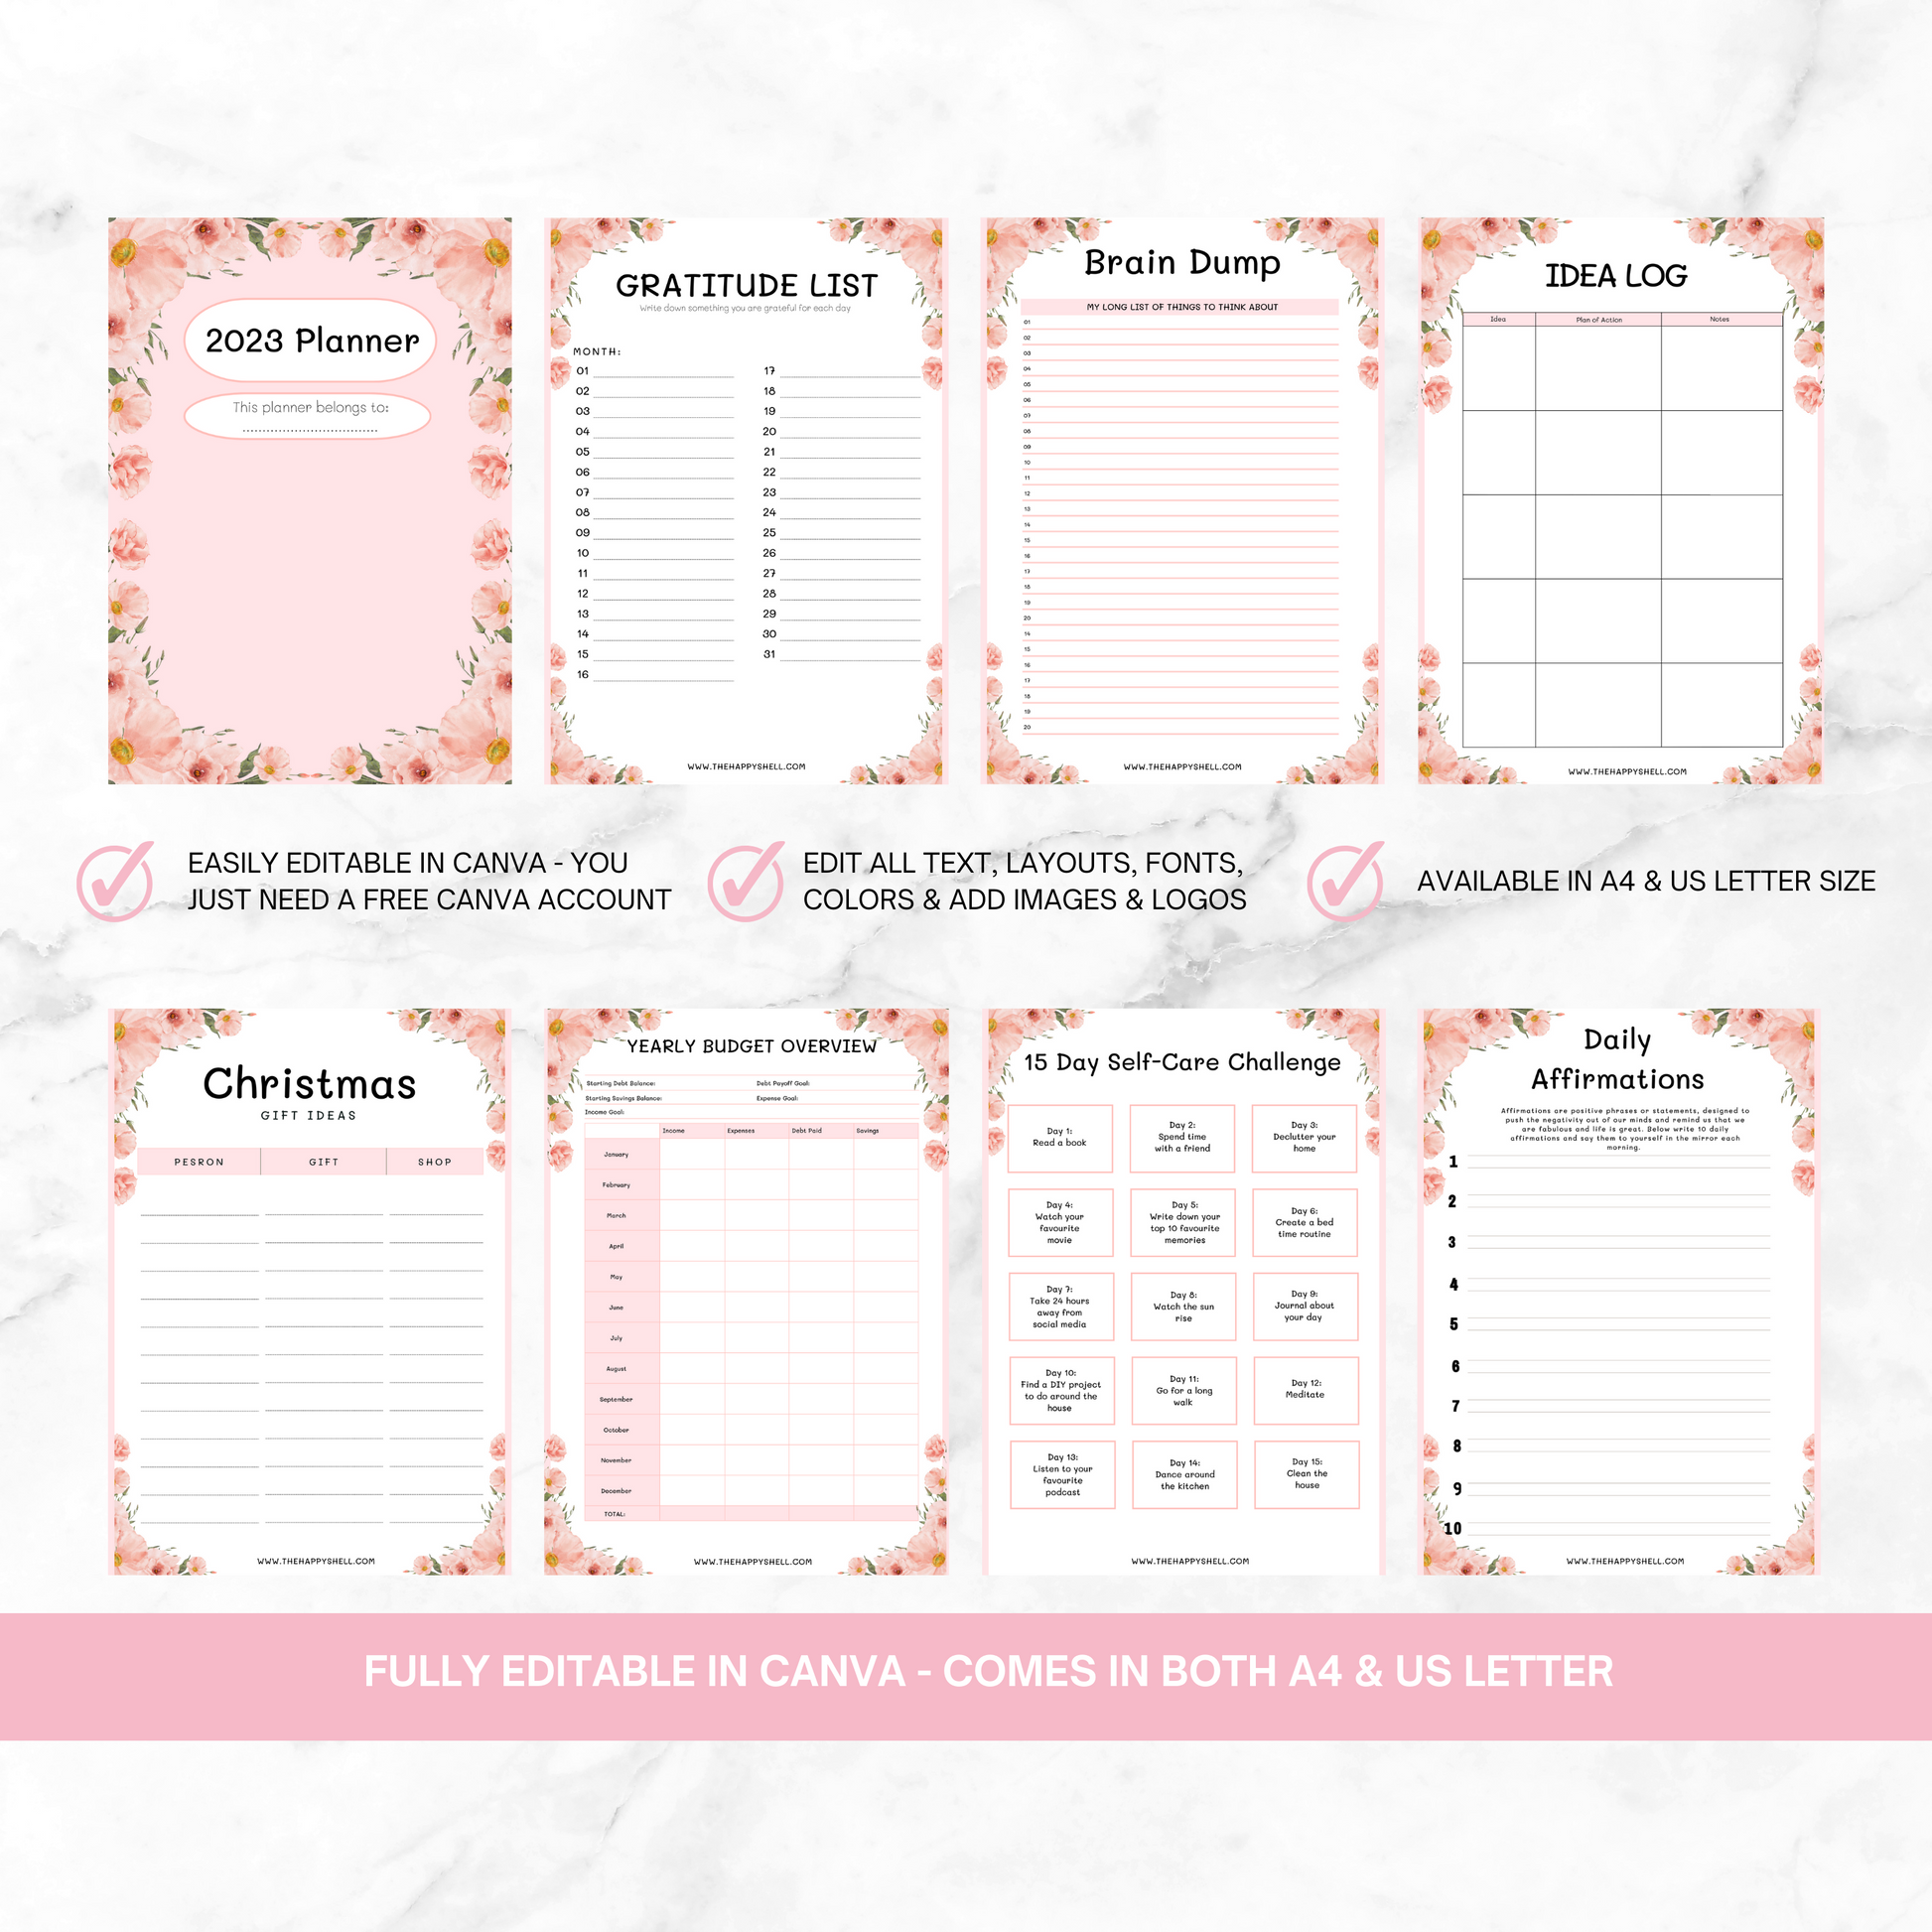 PLR Life Planner Template, Printable PDF with Commercial License to Re –  The Happy Shell